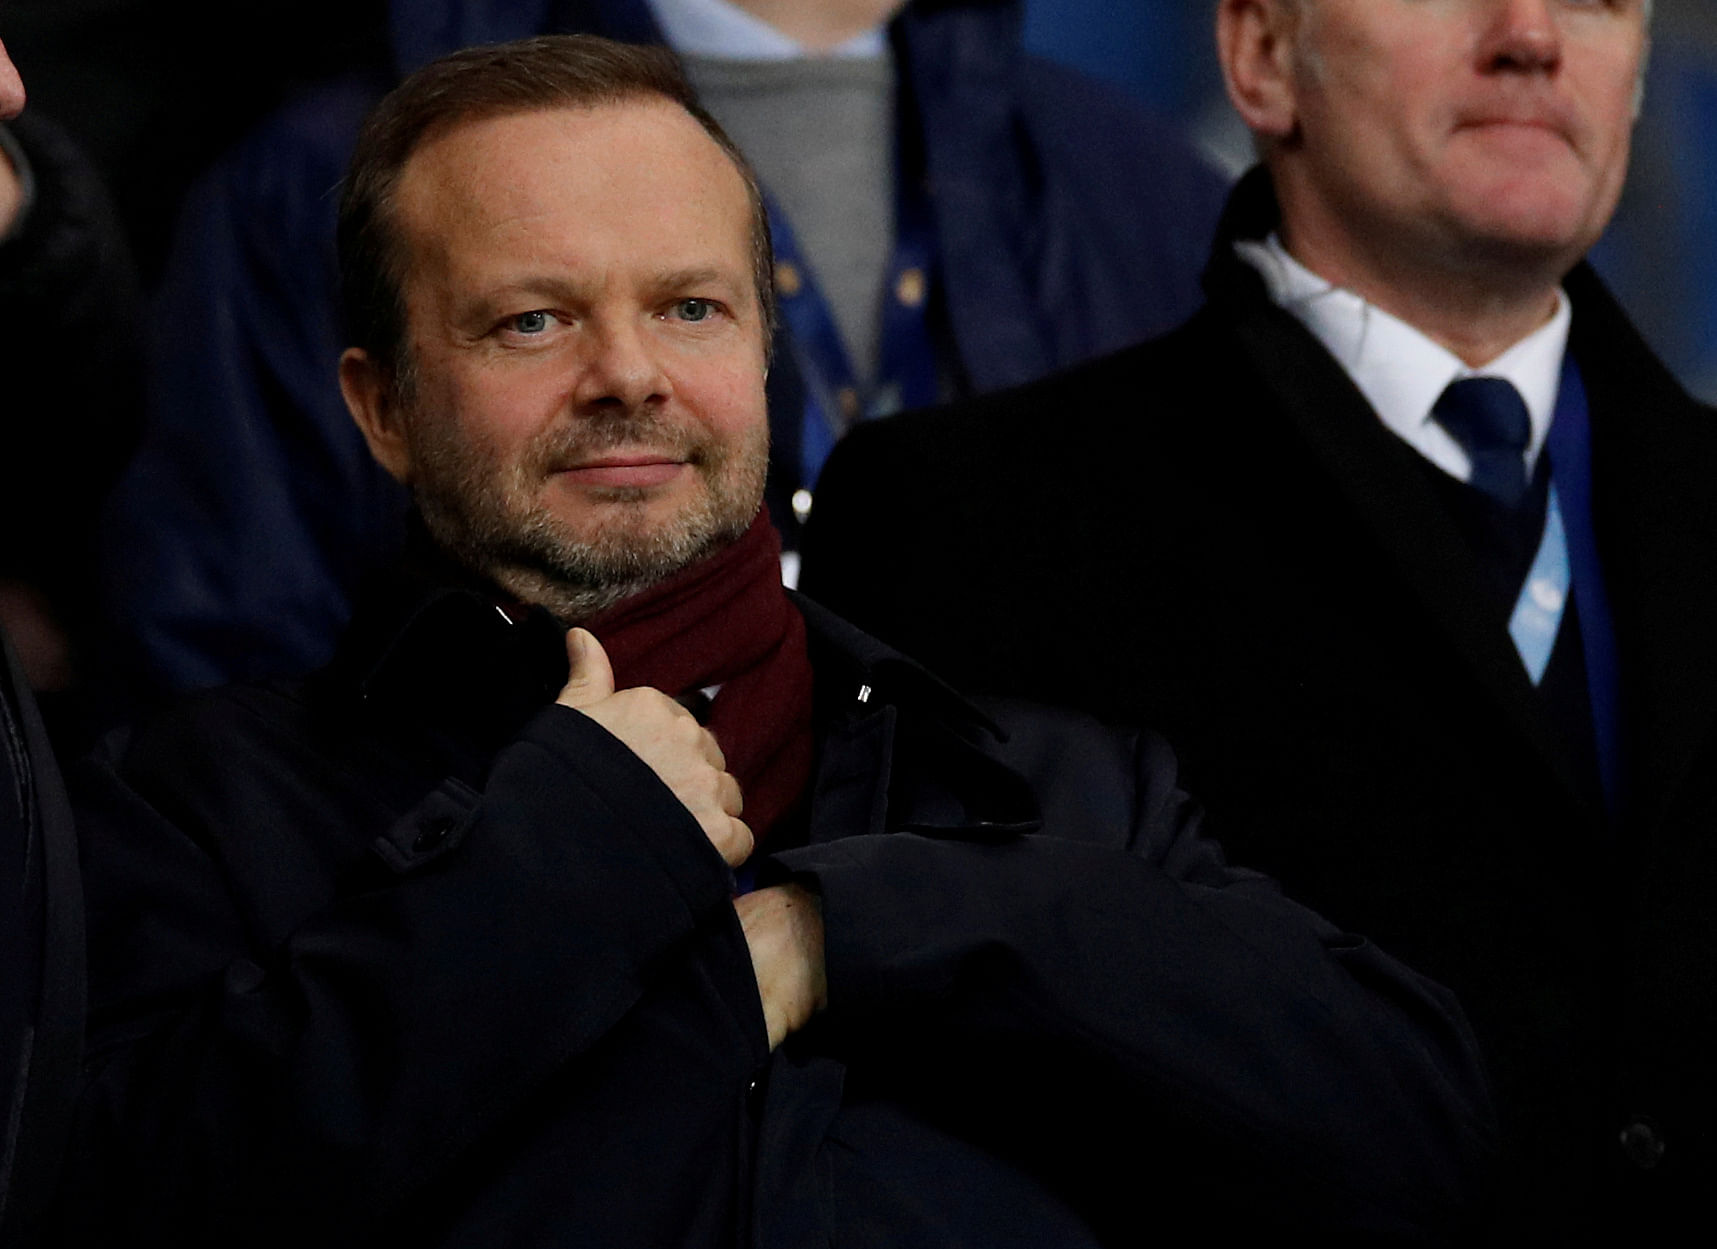 Manchester United executive vice-chairman Ed Woodward. (Reuters Photo)